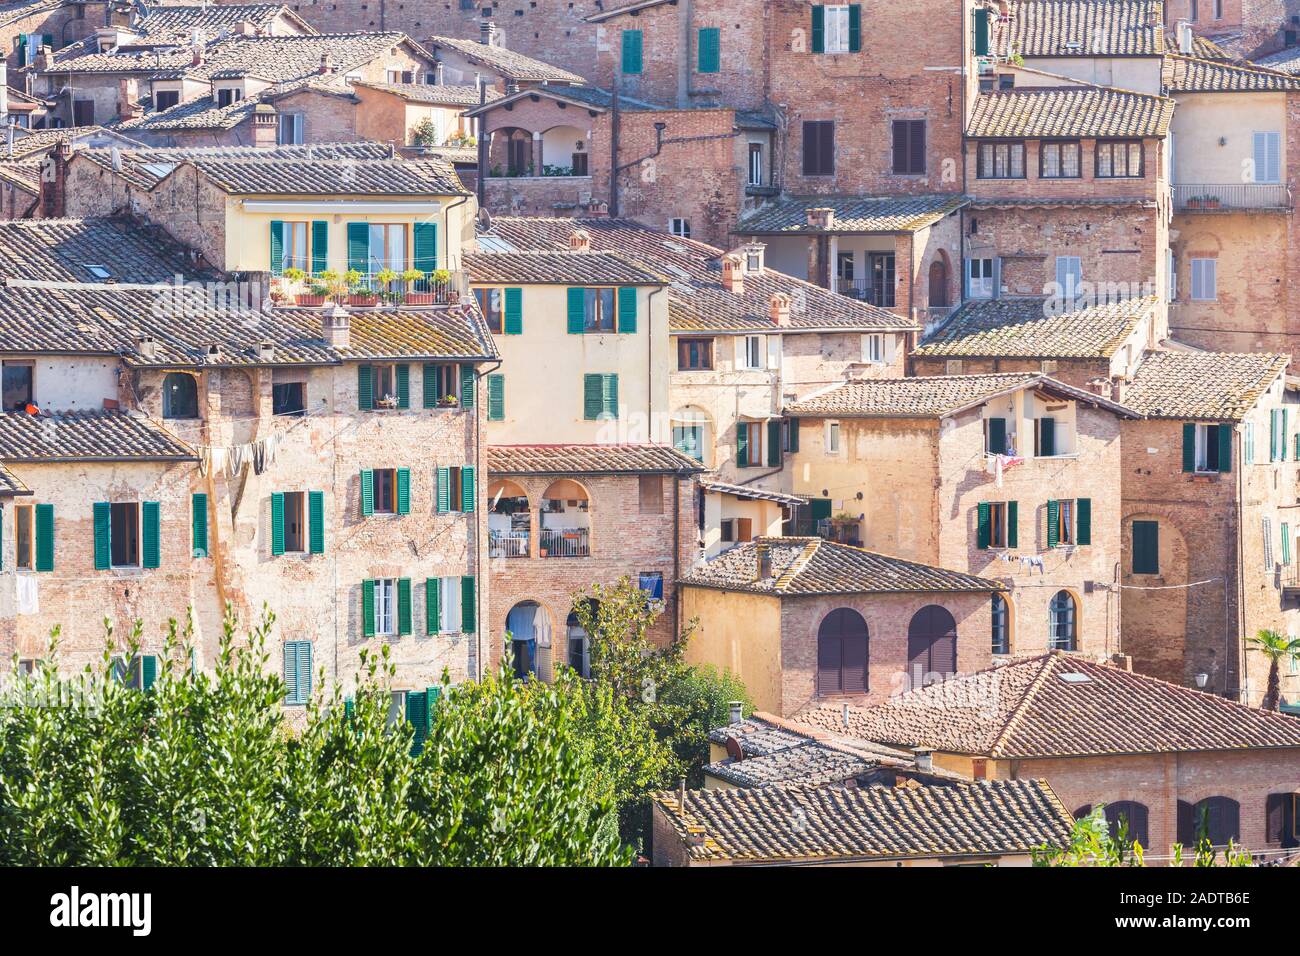 view on the roofs of the houses consisting of bricks and tiles creating the city architecture of Siena, Tuscany, Italy Stock Photo